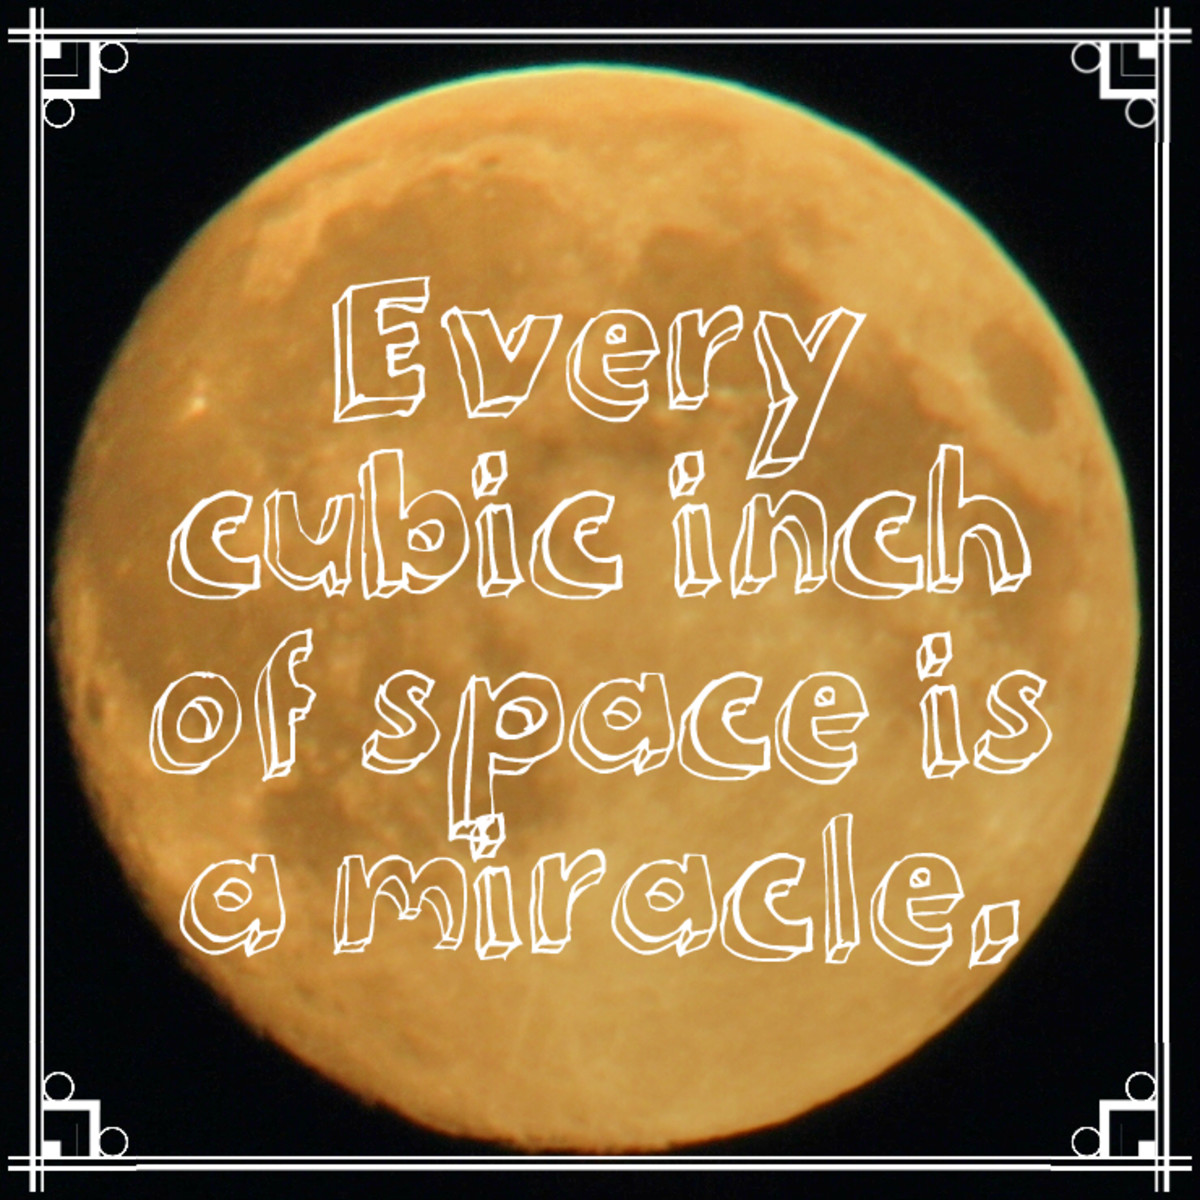 "Every cubic inch of space is a miracle." - Walt Whitman, American poet